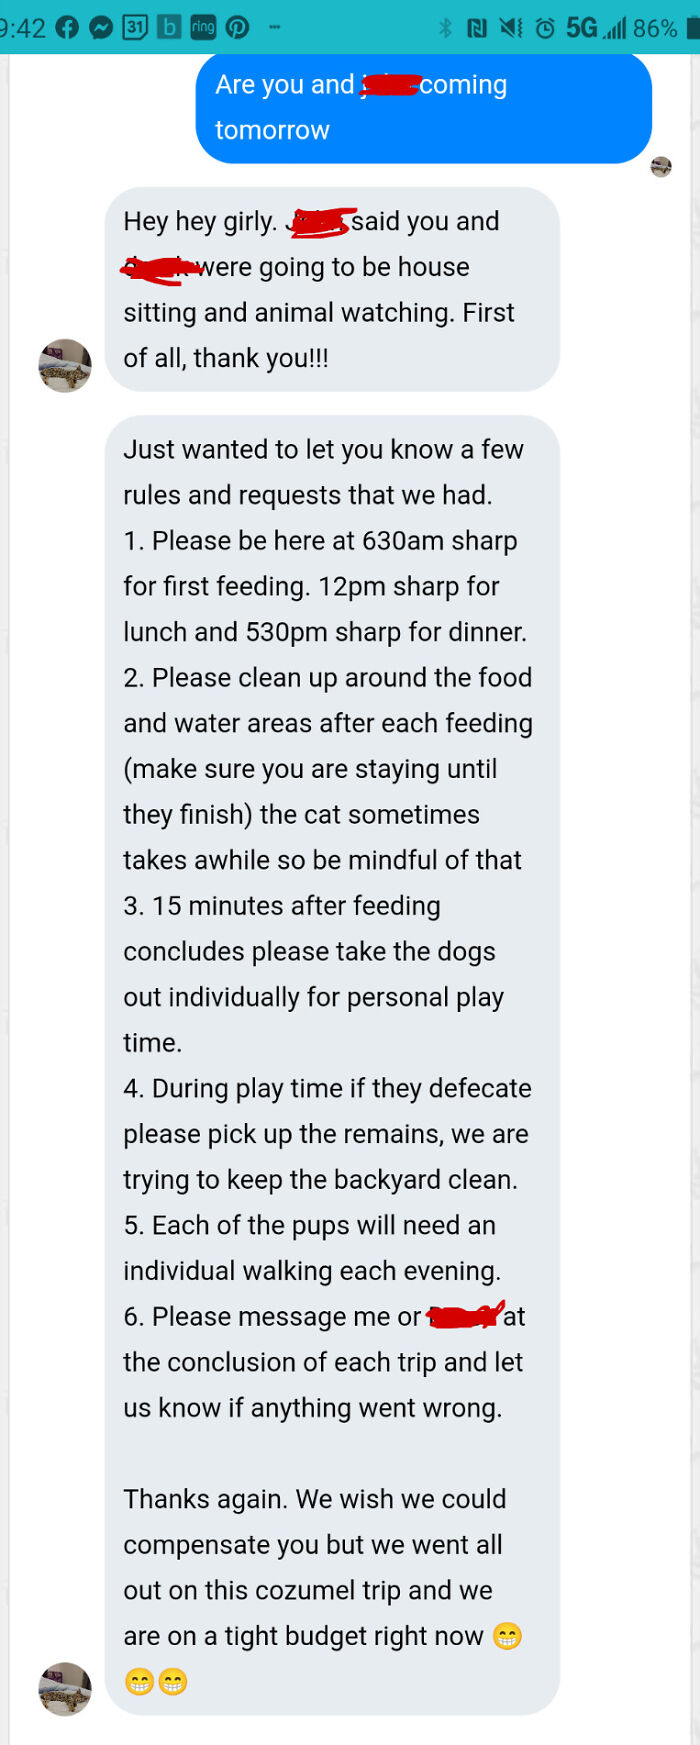 Sister Was Commissioned For Unpaid Pet Sitting With Crazy Rules